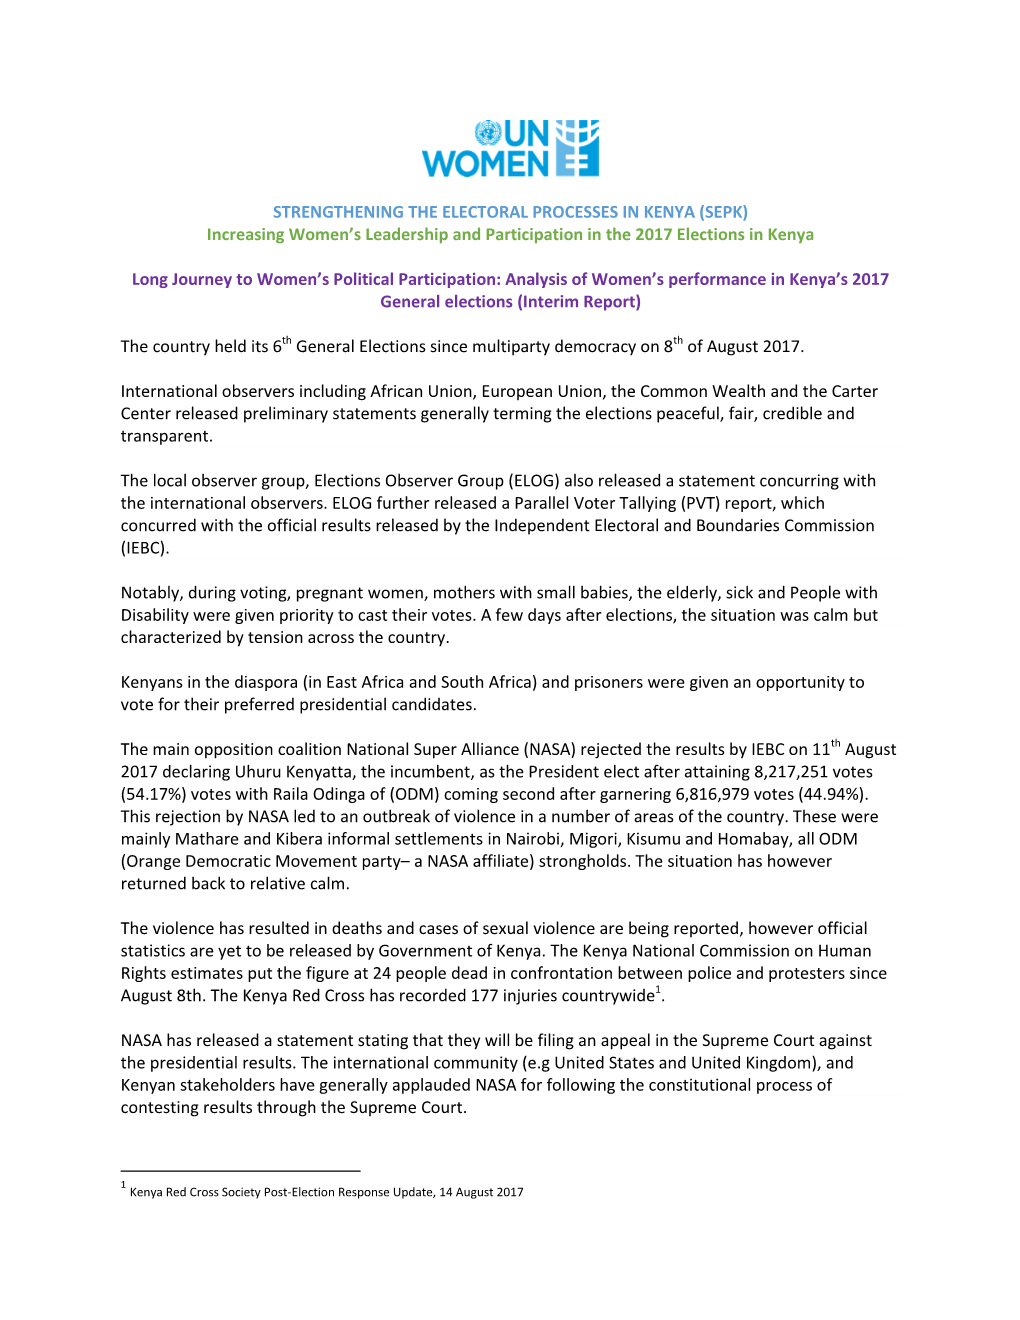 Increasing Women's Leadership and Participation in the 2017 Elections In